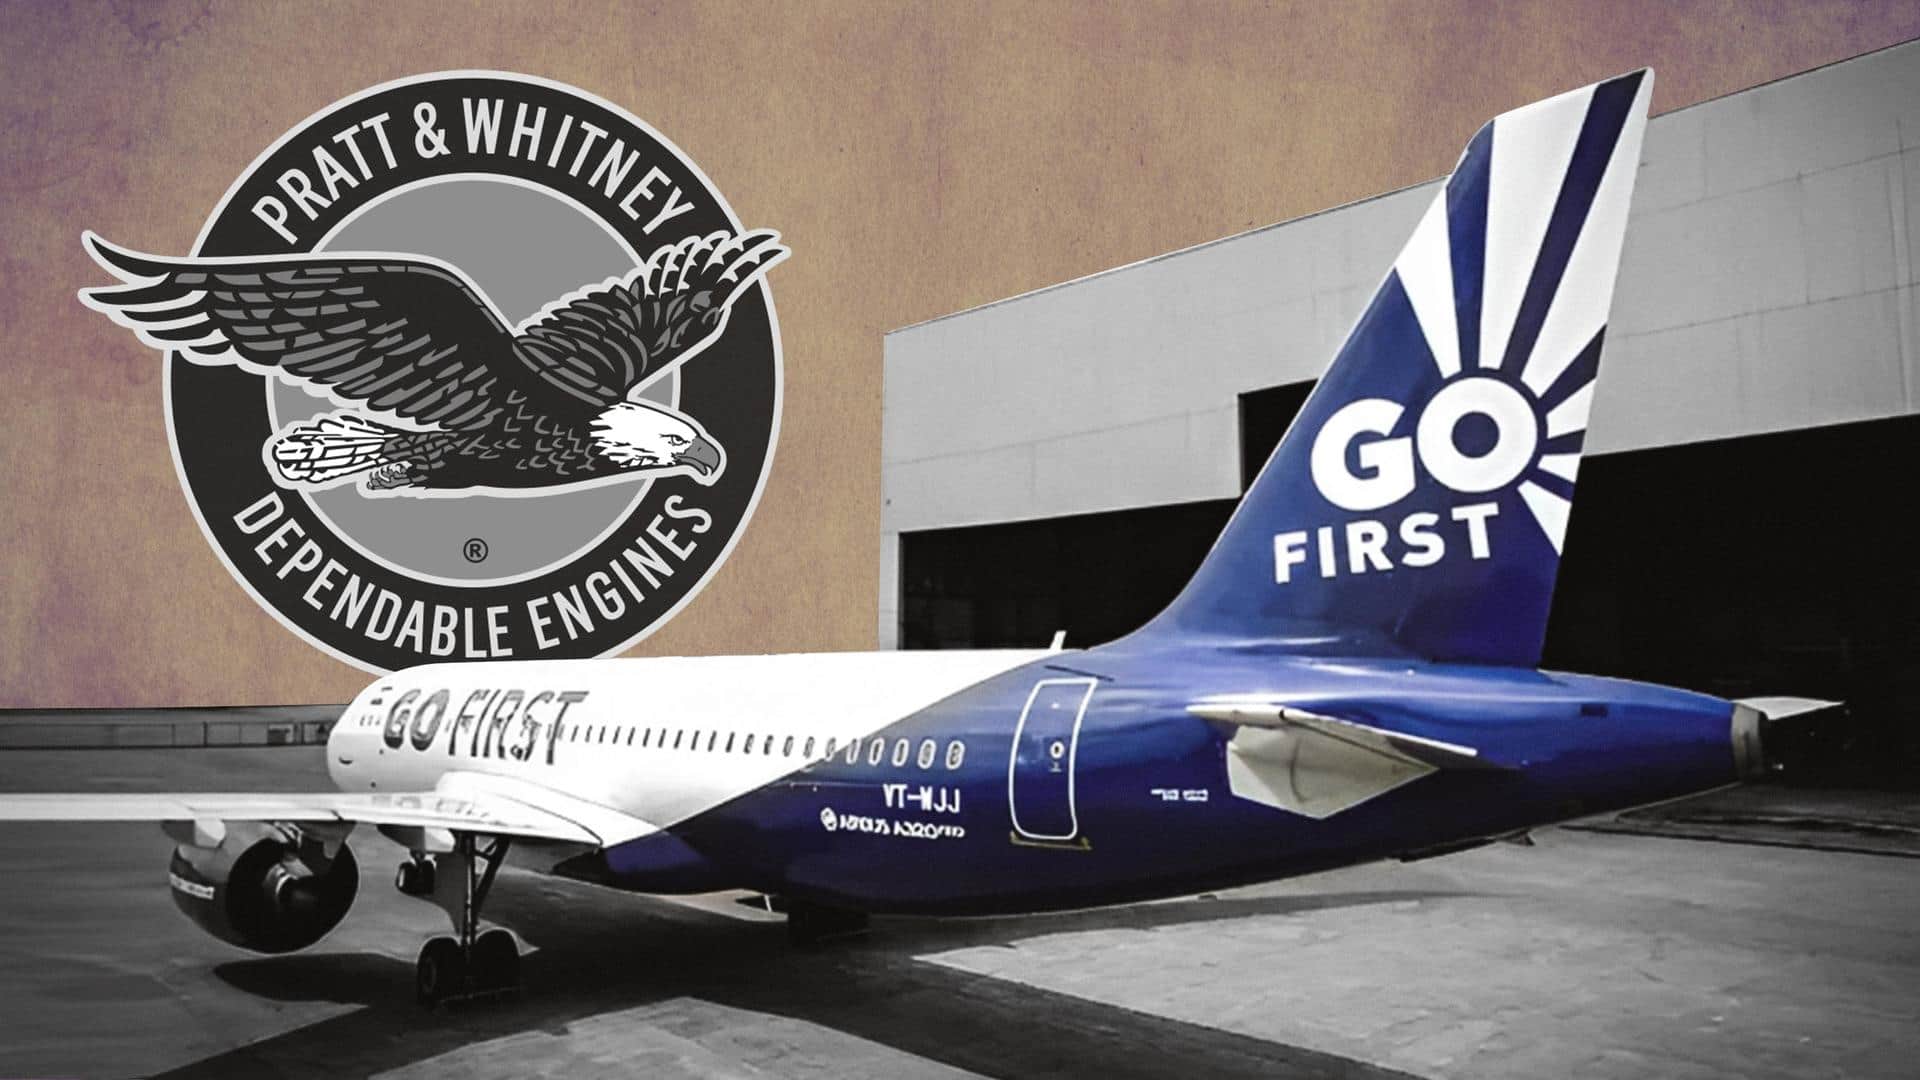 Pratt & Whitney accuses Go First of 'lengthy' non-payment history